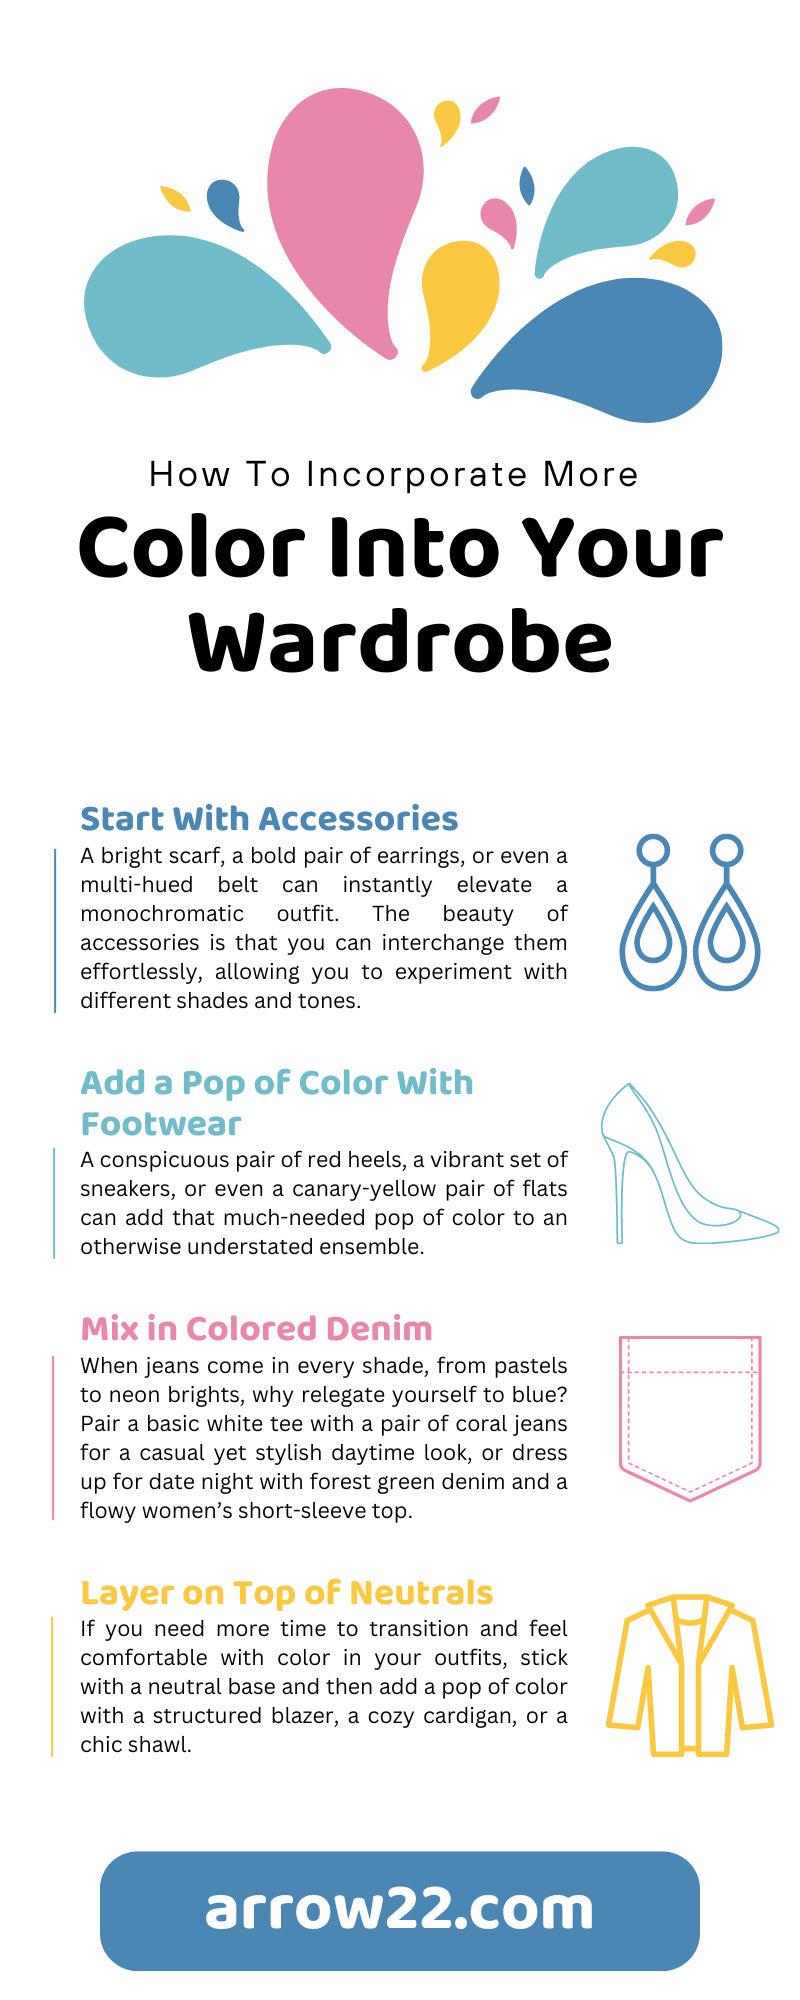 How To Incorporate More Color Into Your Wardrobe